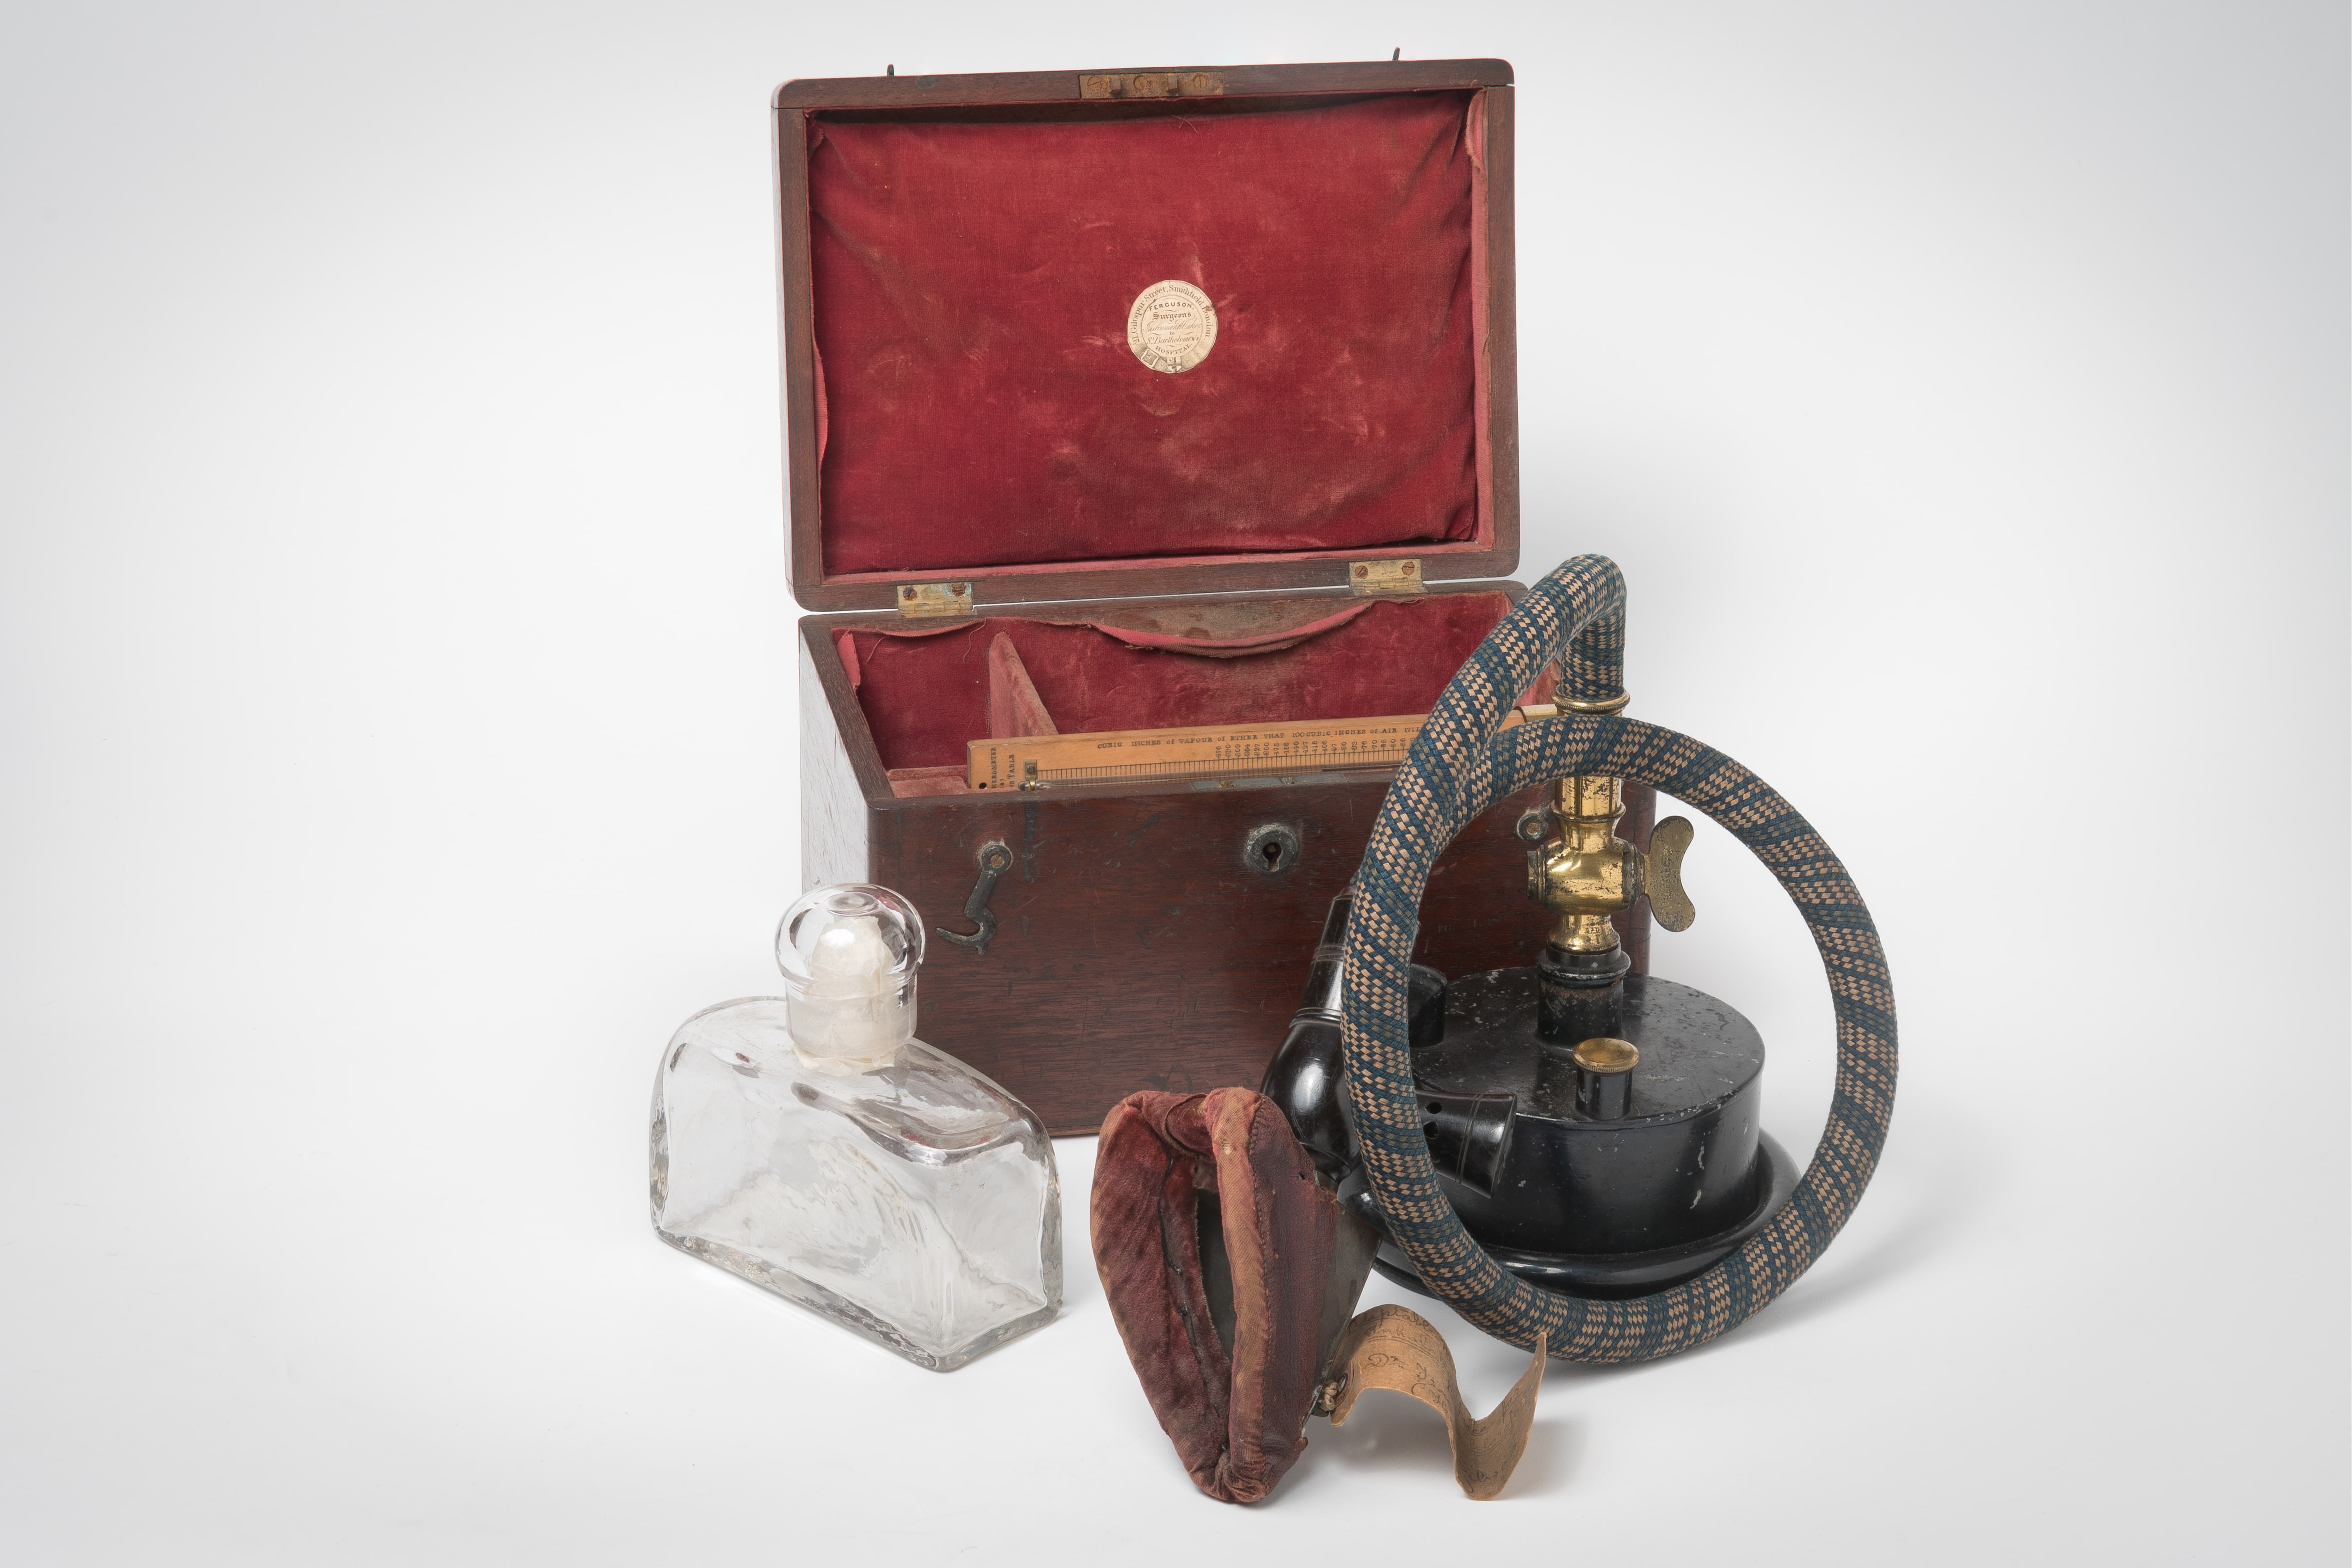 Wooden box with red linking, propped open. In front, a glass flask, and a anaesthesia facemask made of red velvet attached to a small metal cannister